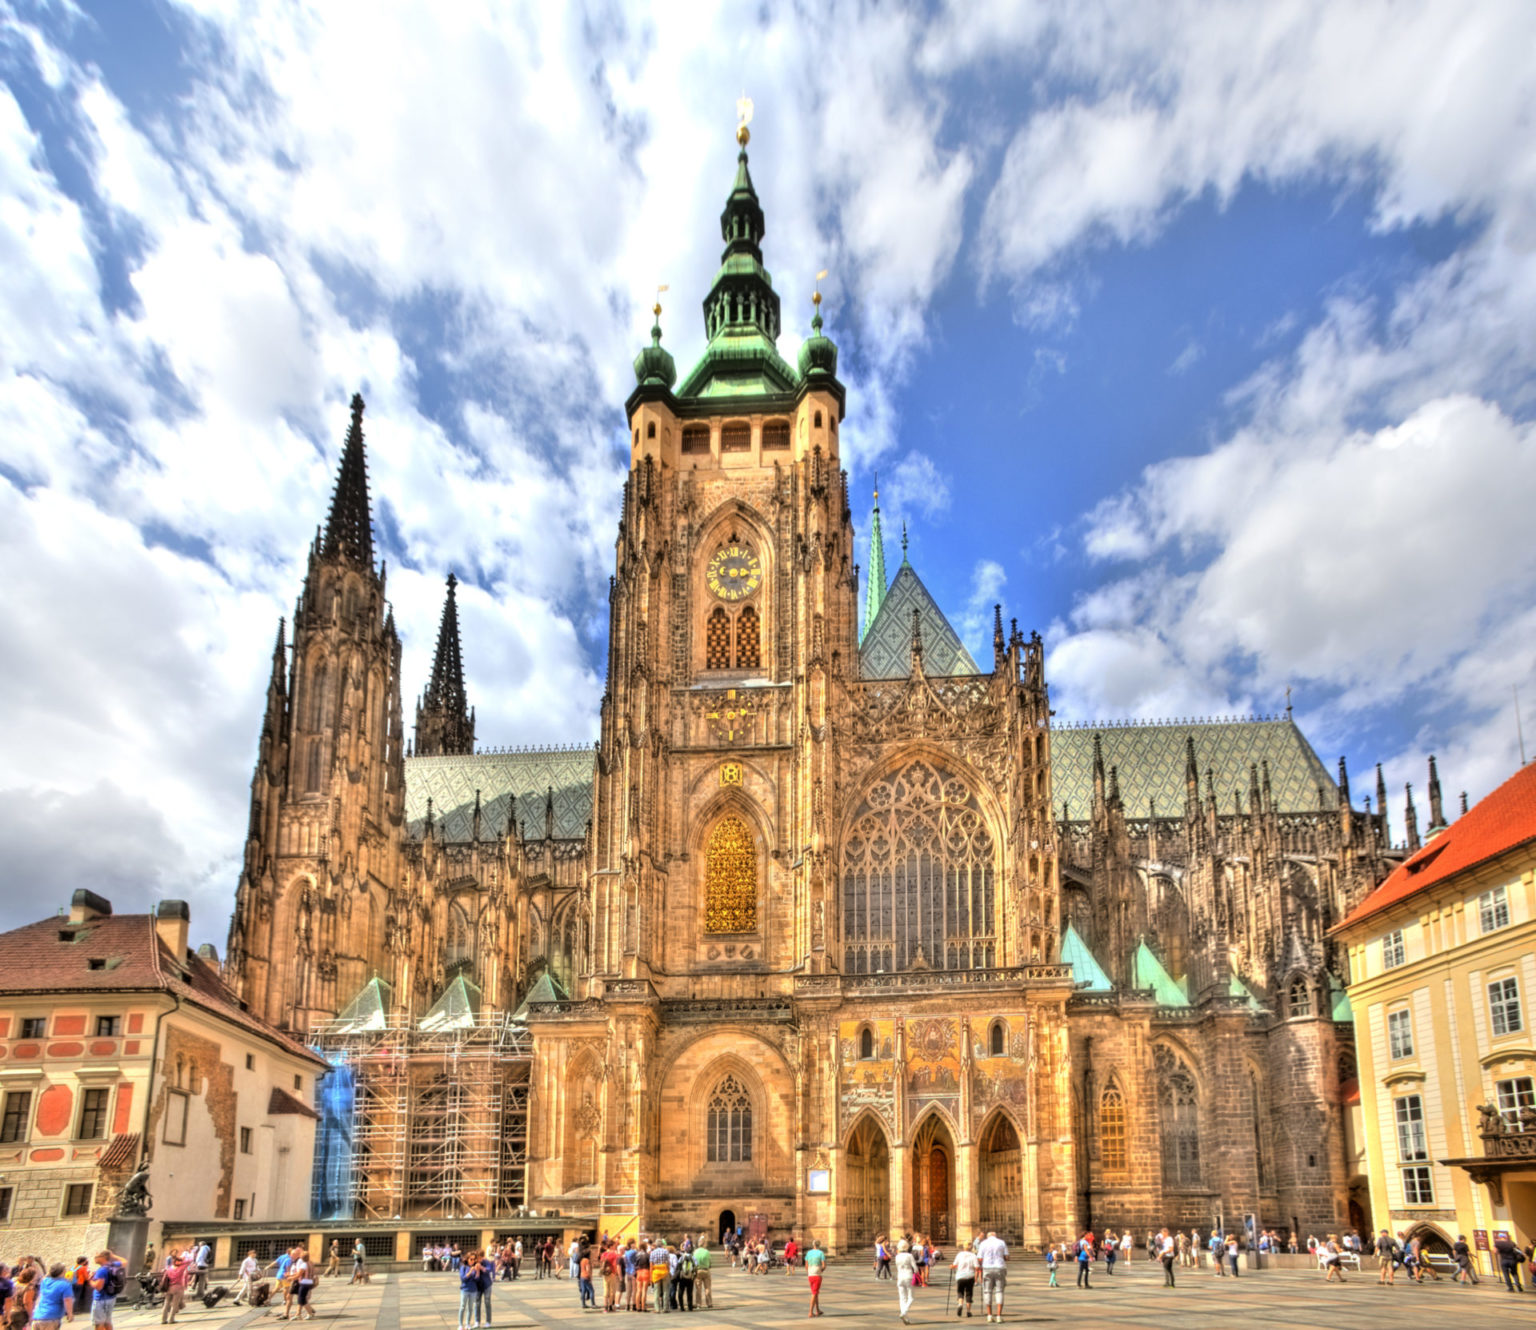 Top Prague Attractions And Monuments Best To See In Prague